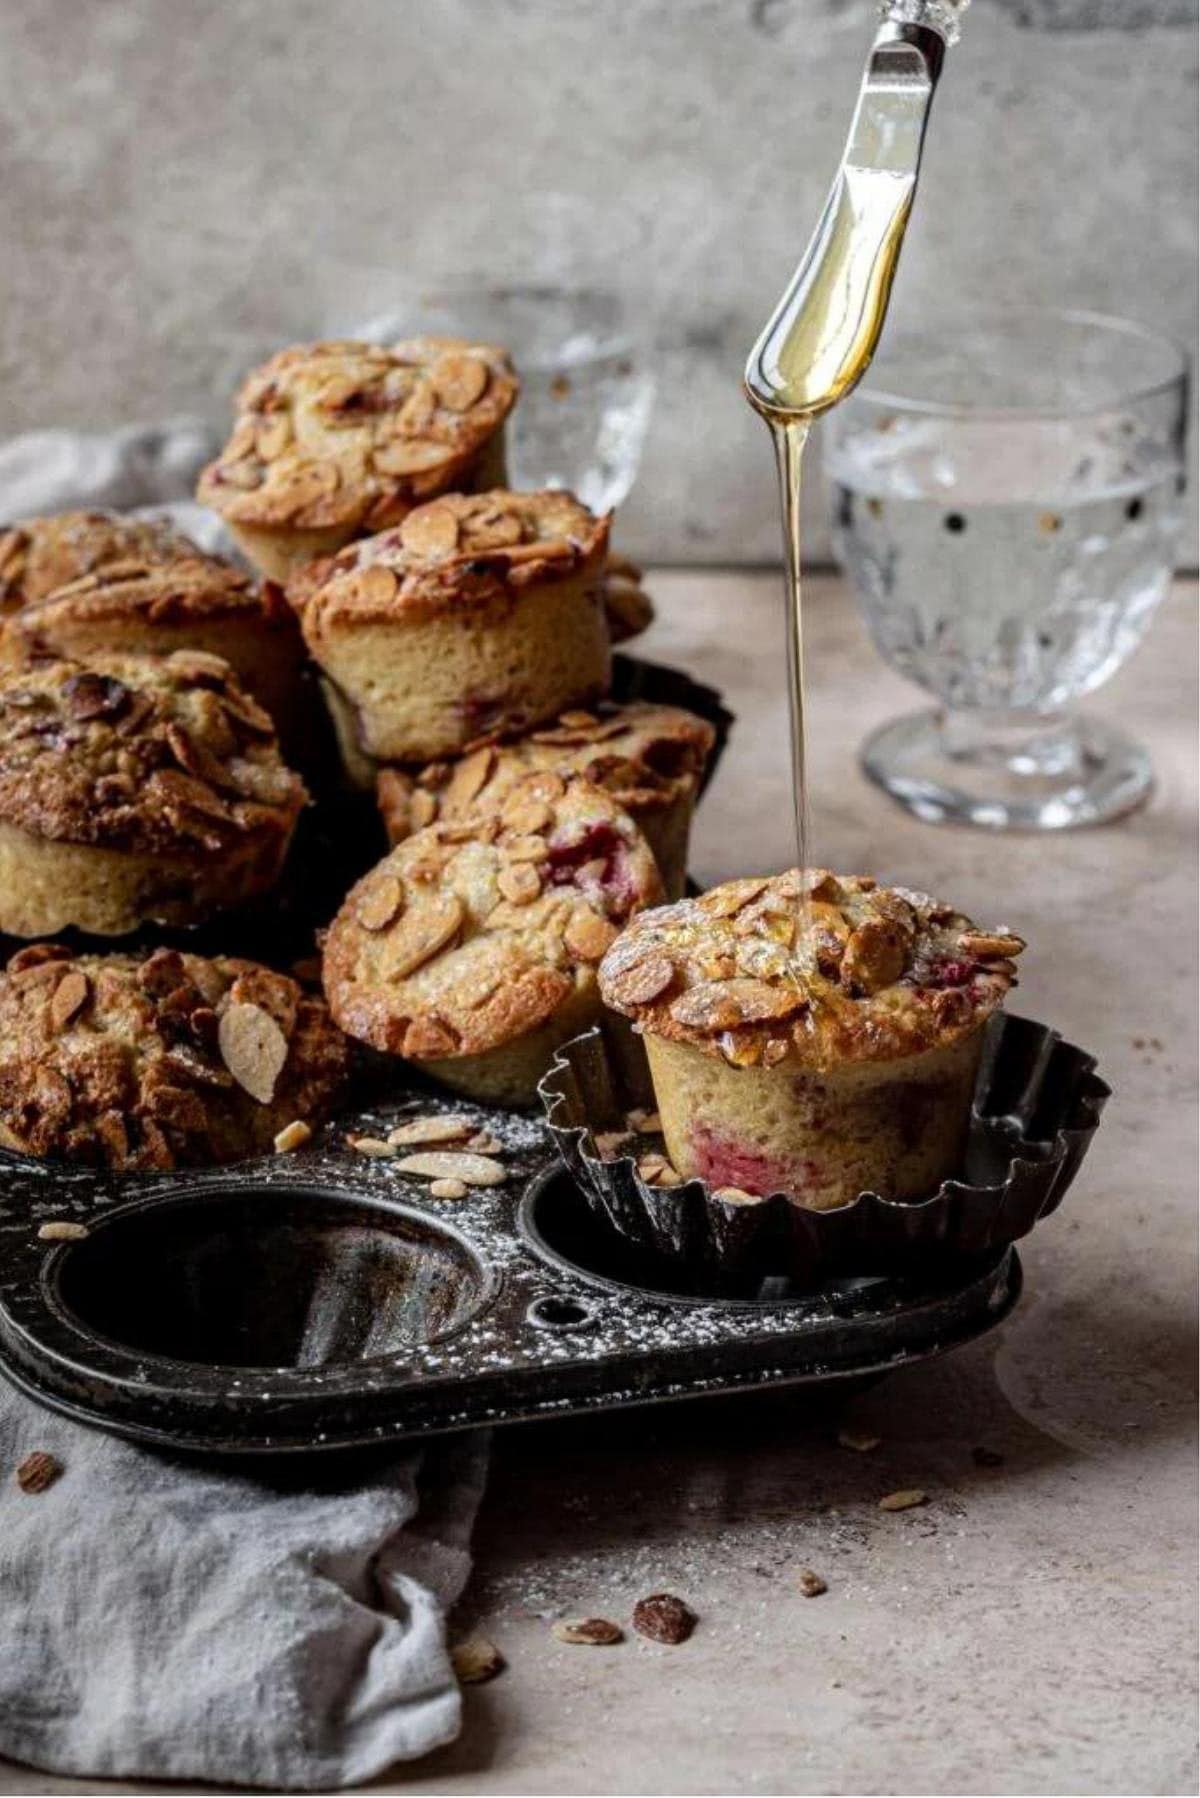 Raspberry almond muffin on a vintage muffin tray, with honey being drizzled on it.